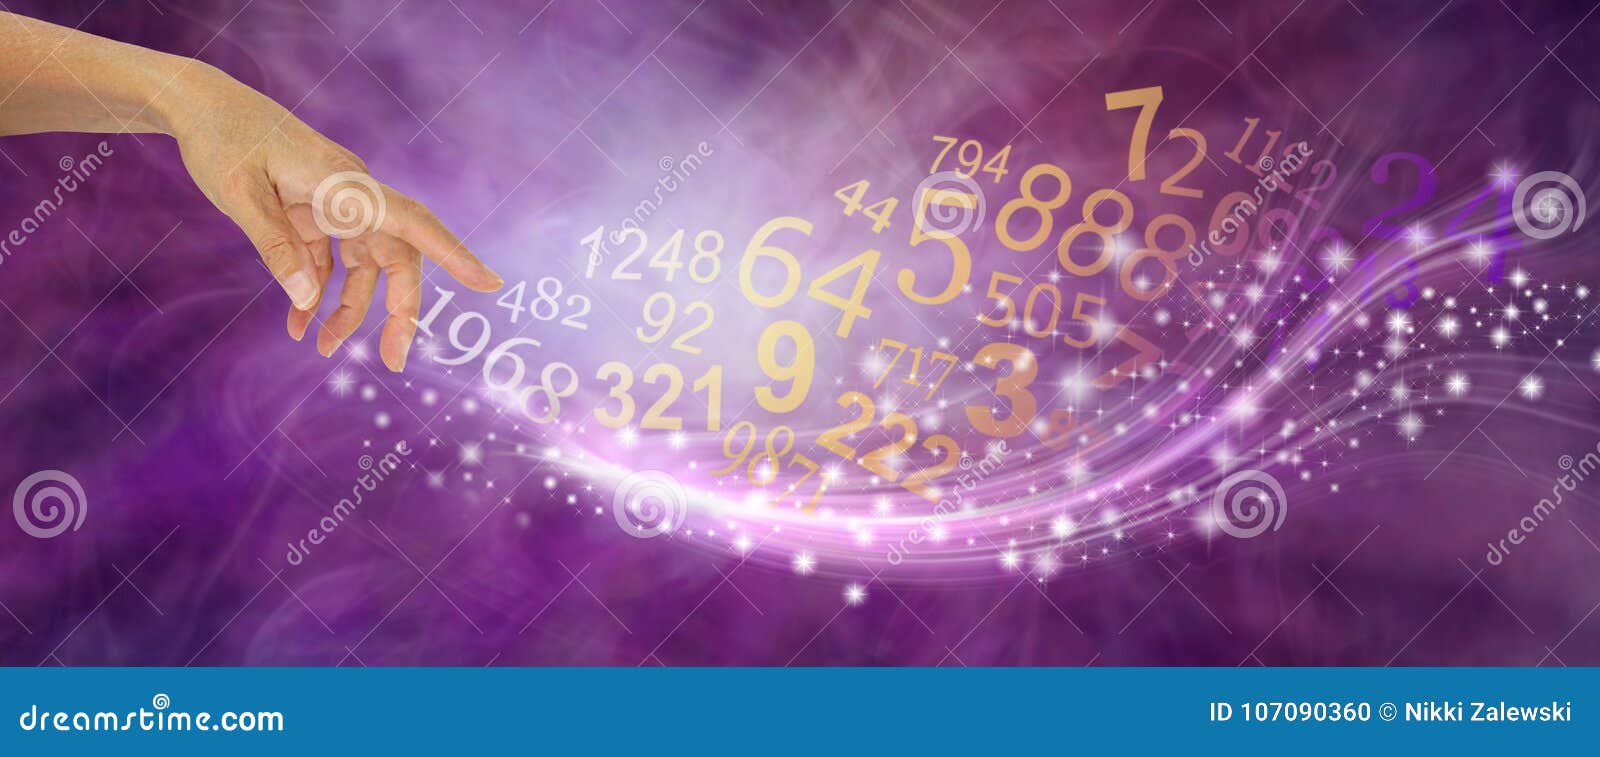 numerology is far more than just numbers